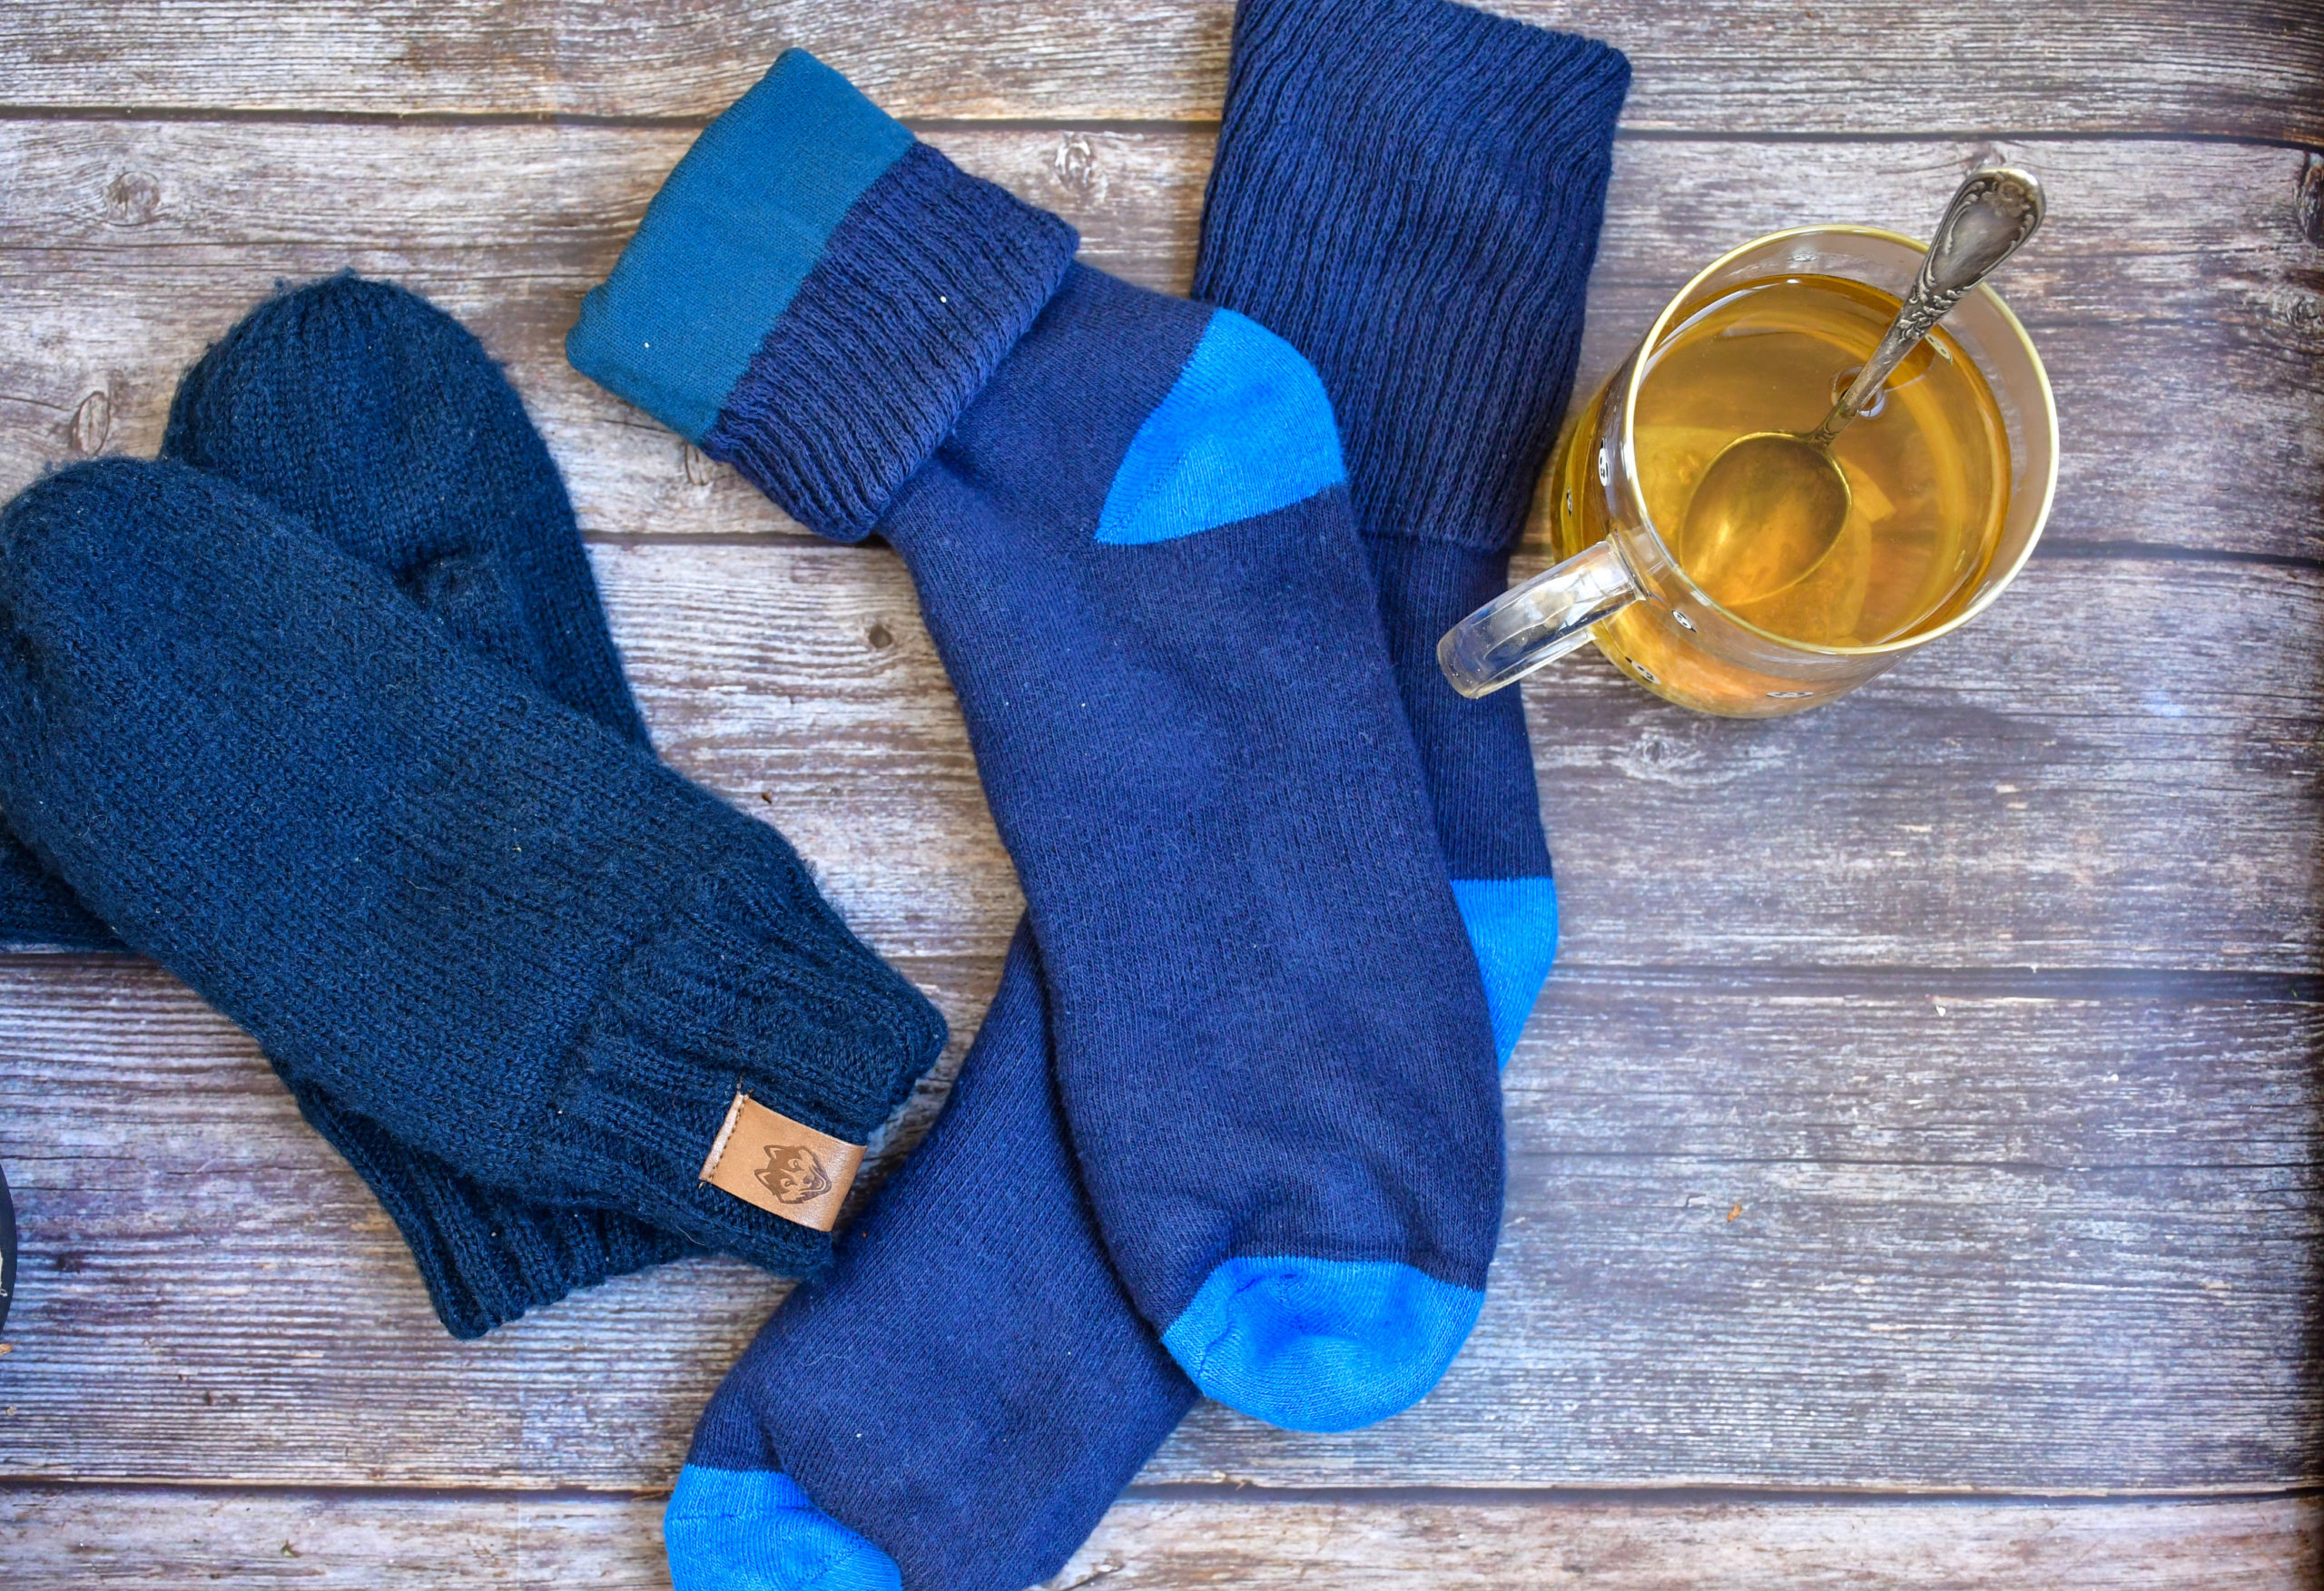 How Often Should We Refresh Our Sock Drawer?